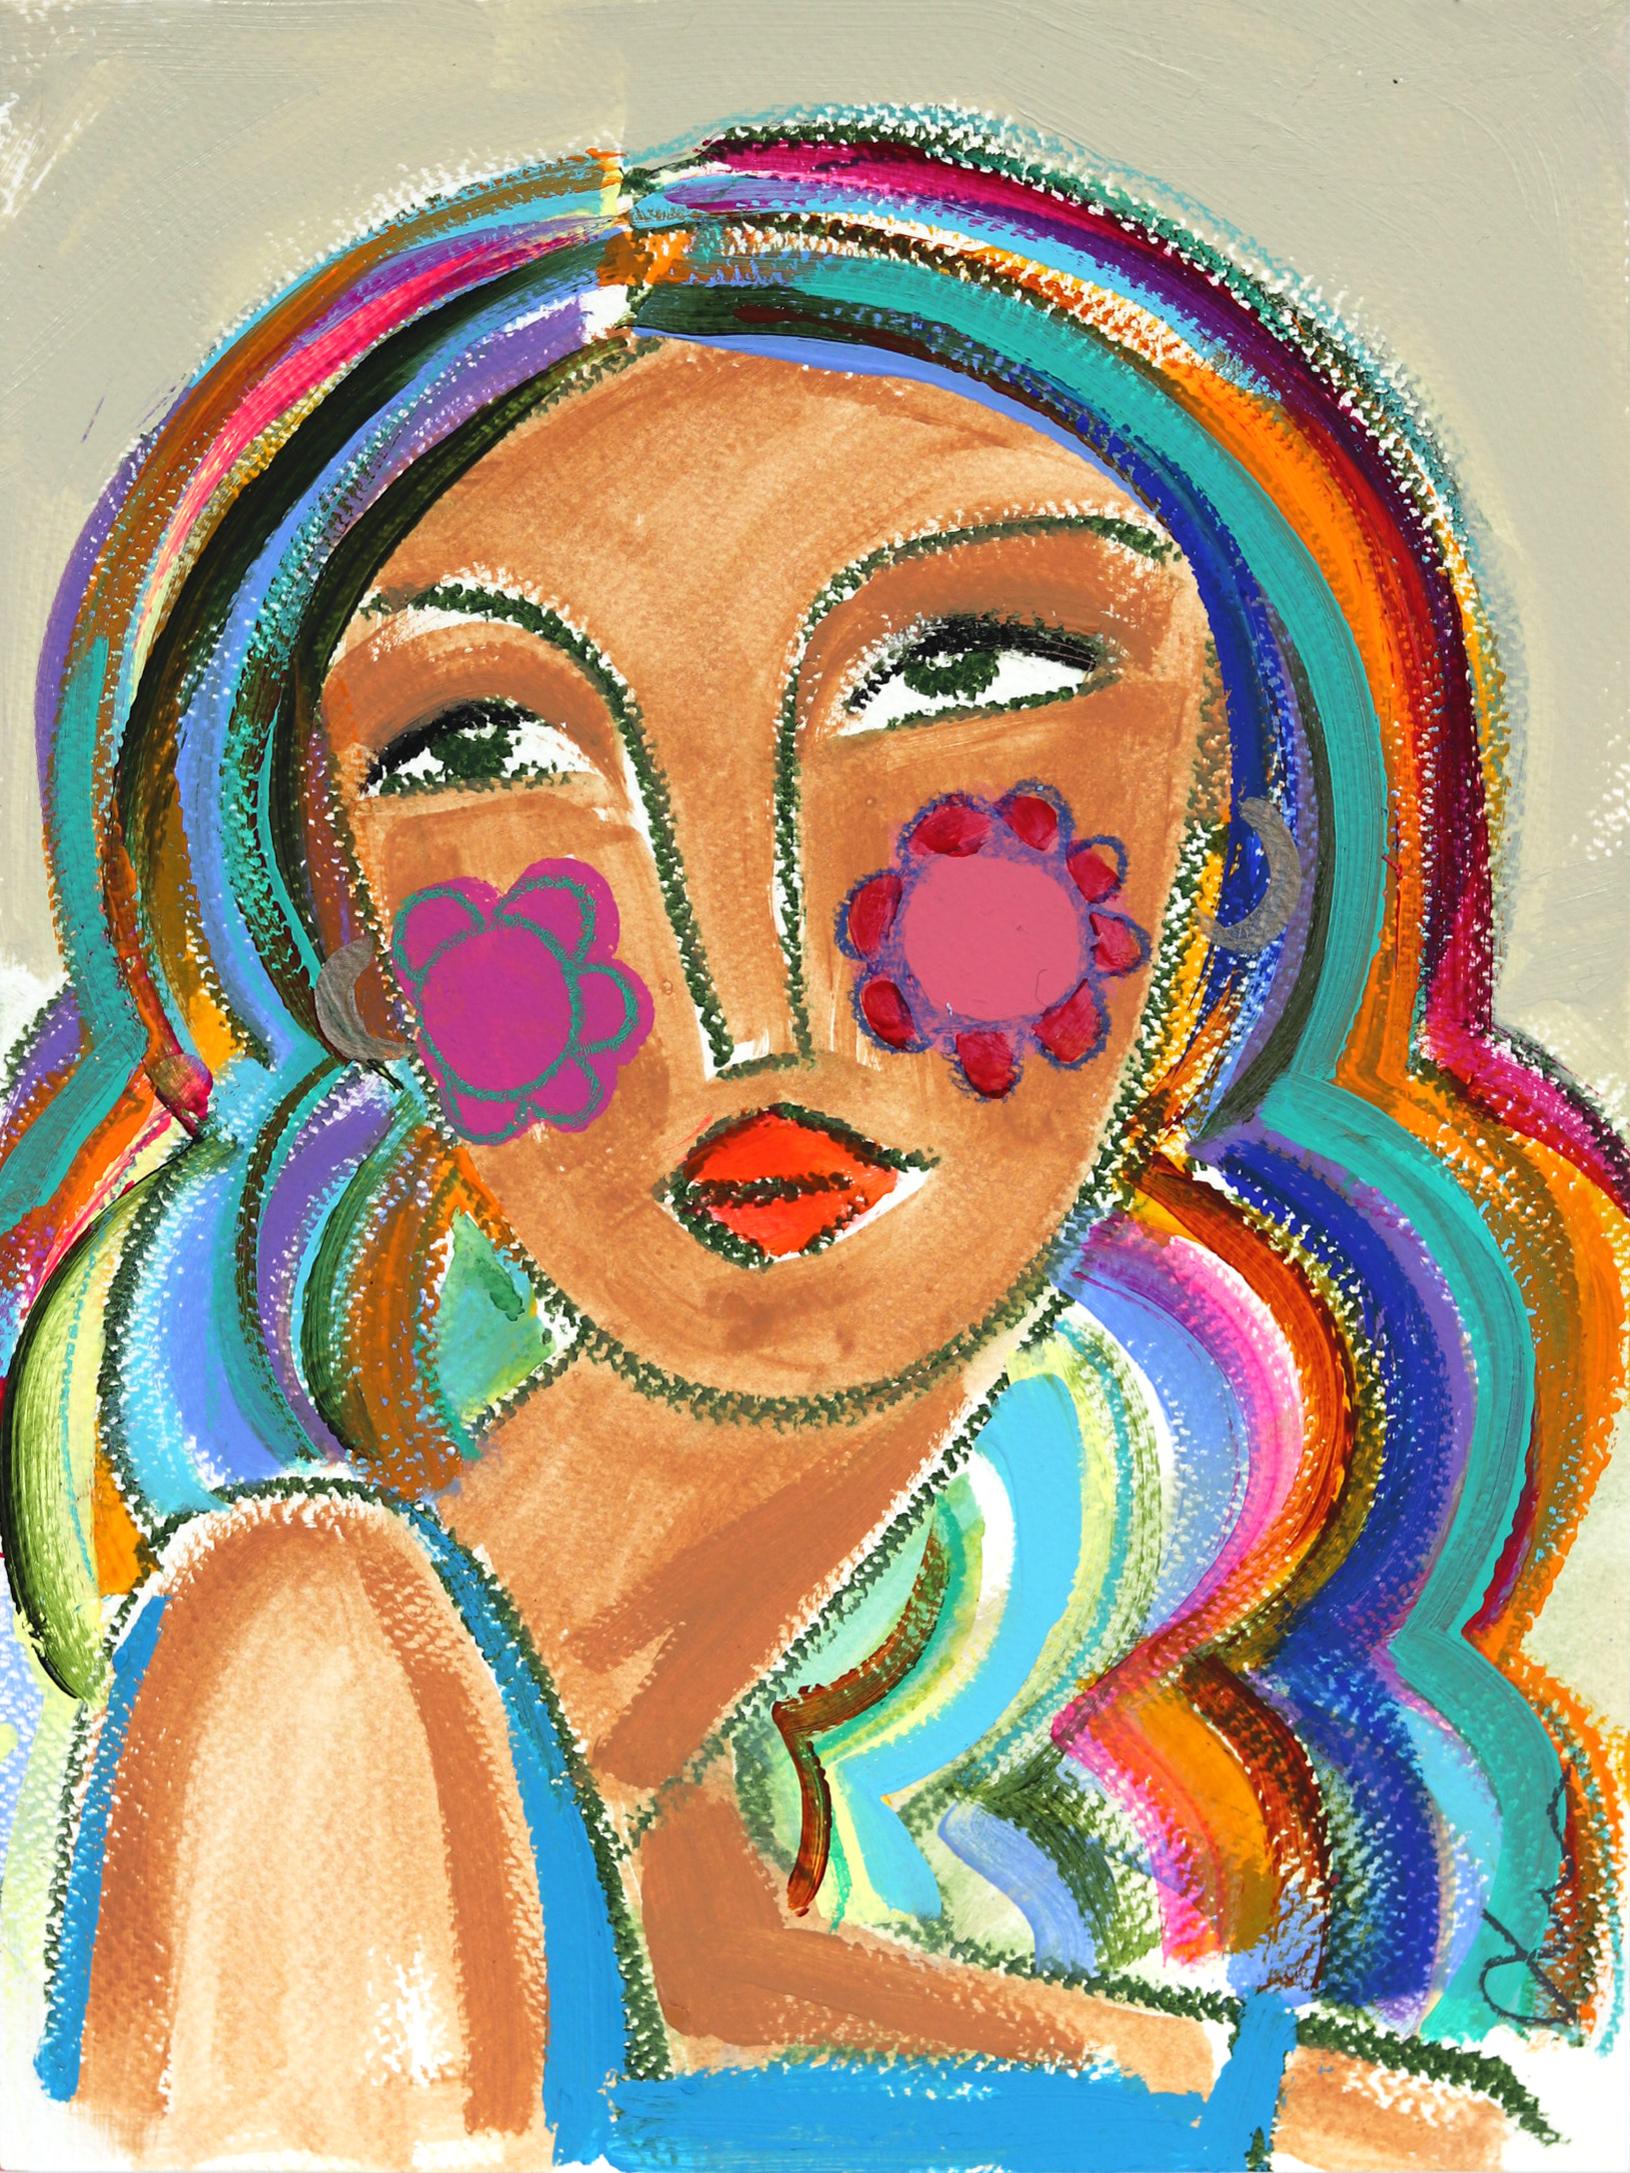 Bombshell Bright 5 - Oil Pastel Abstract Figurative Portrait